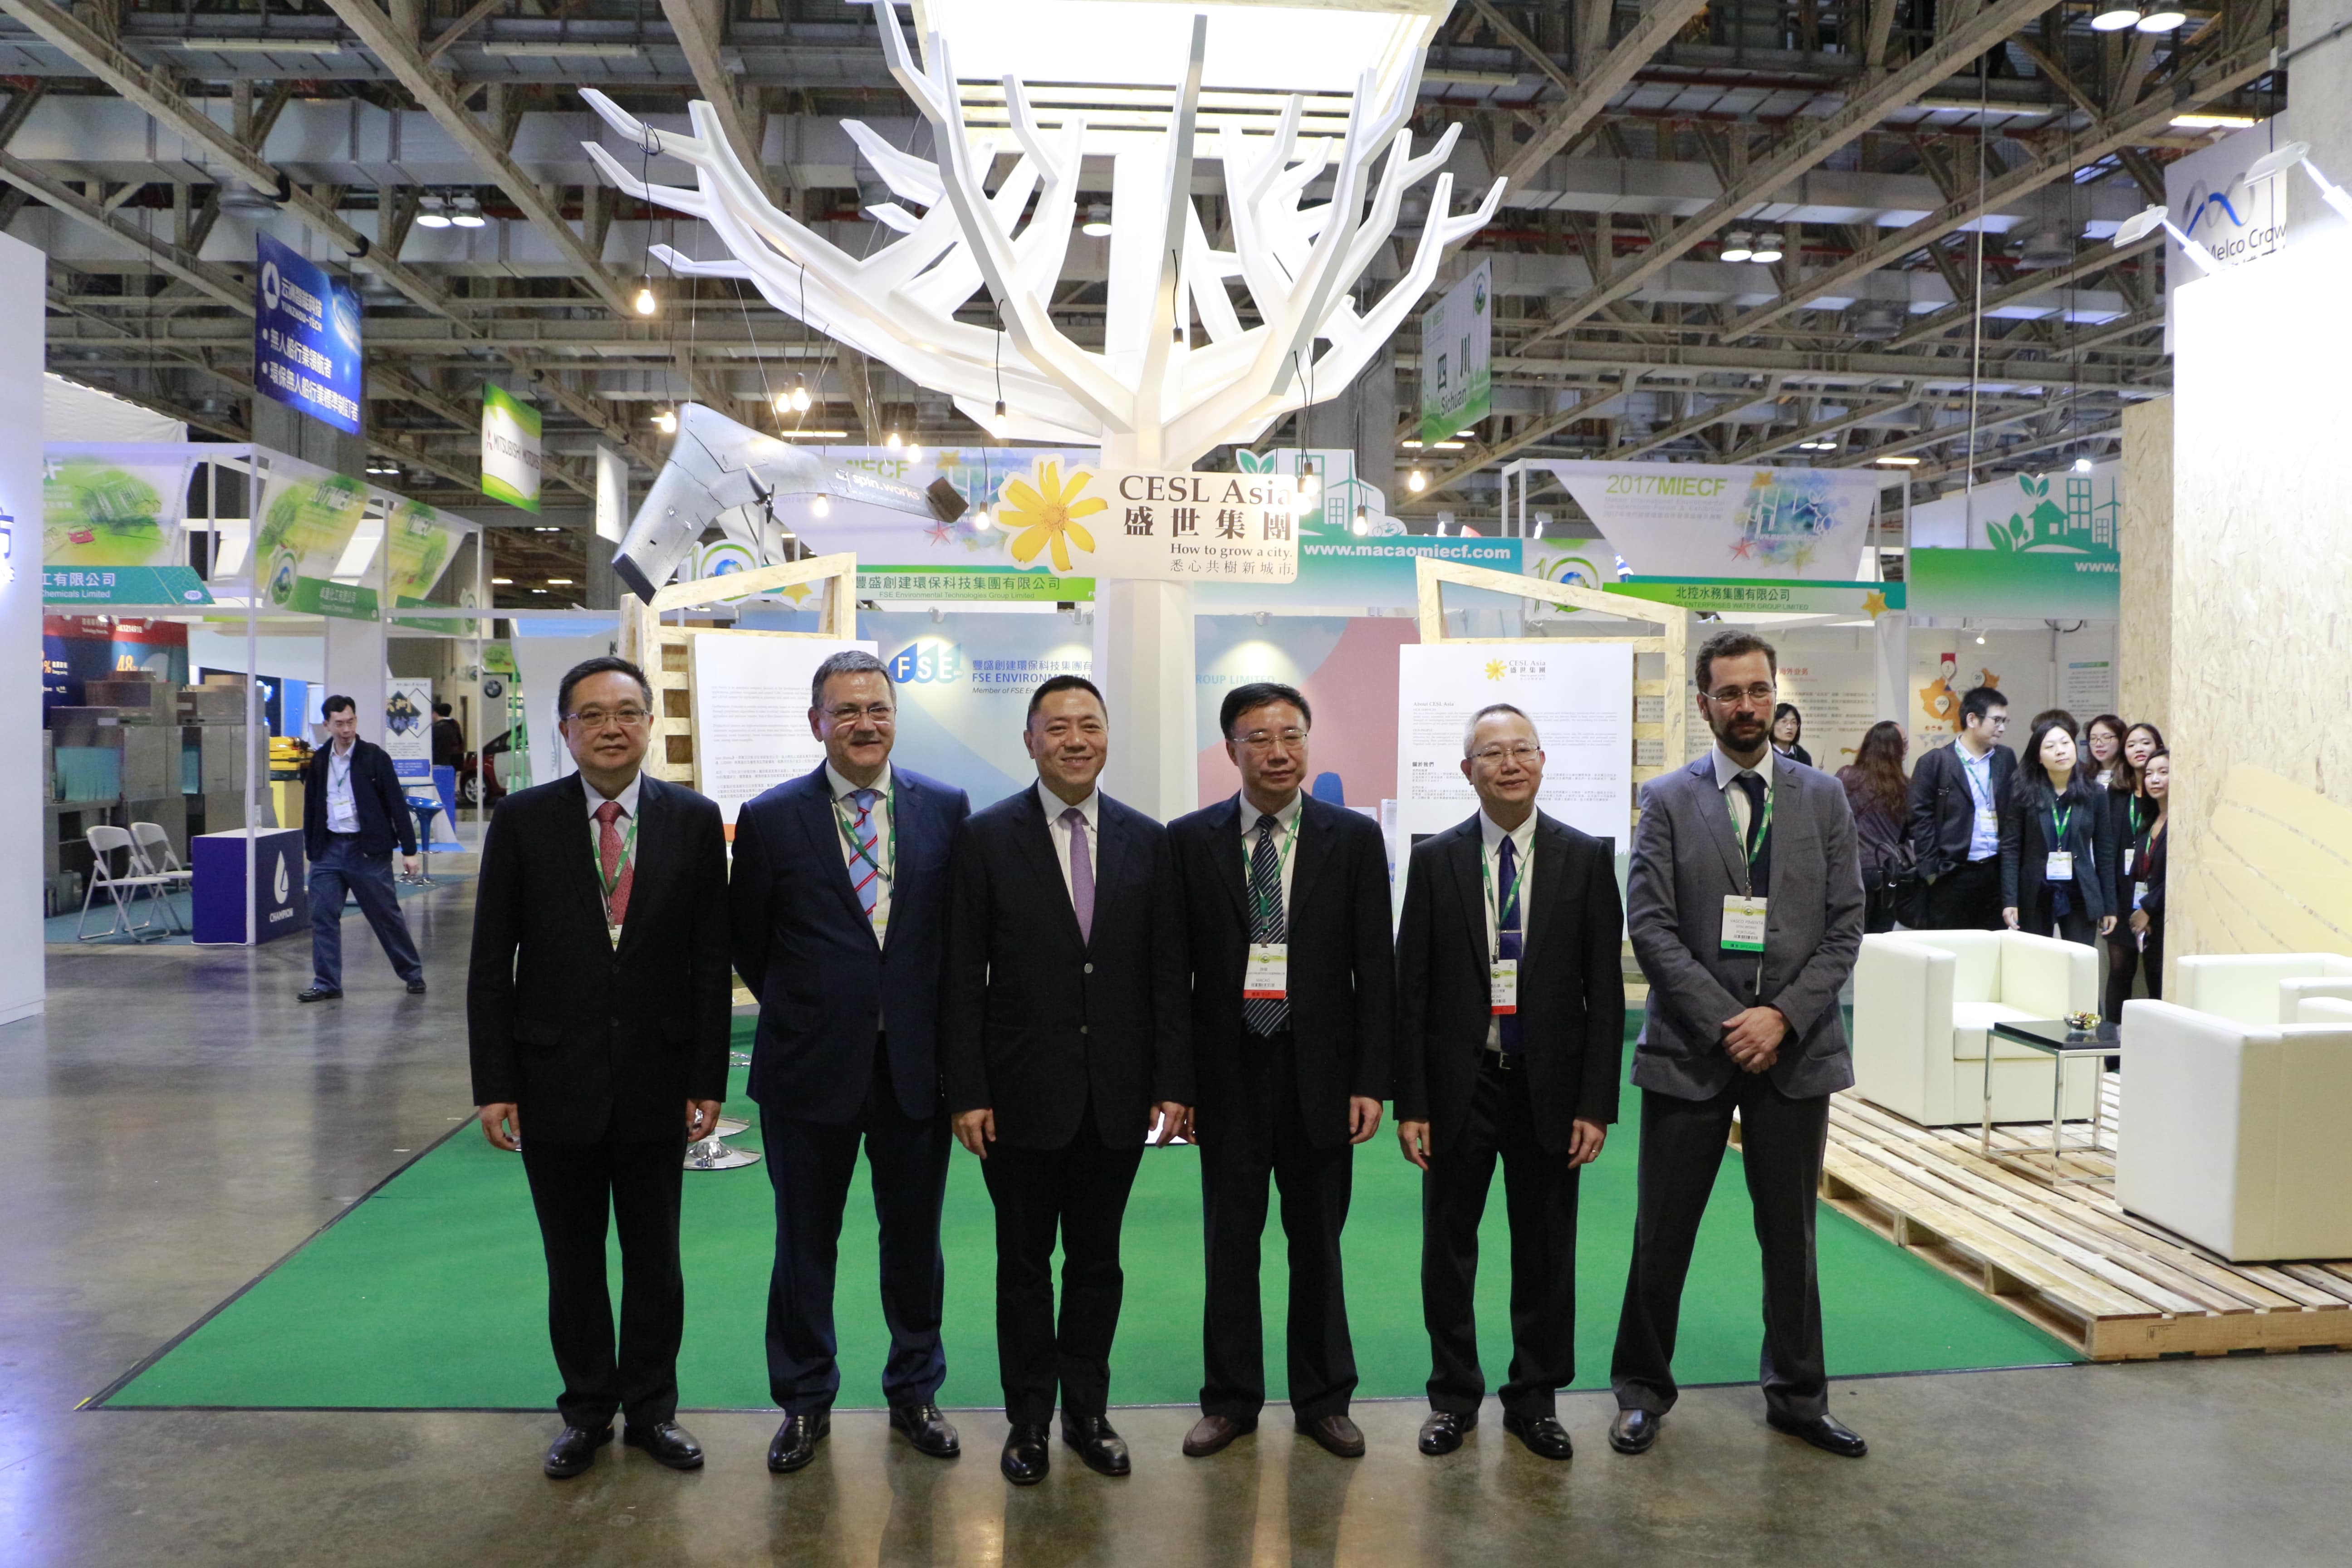 CESL Asia showcases its investments in the context of OBOR and the Macau Platform as well as its collaboration with Spin.Works, an aerospace company from Portugal dedicated to the development and manufacturing of defense, space and unmanned system